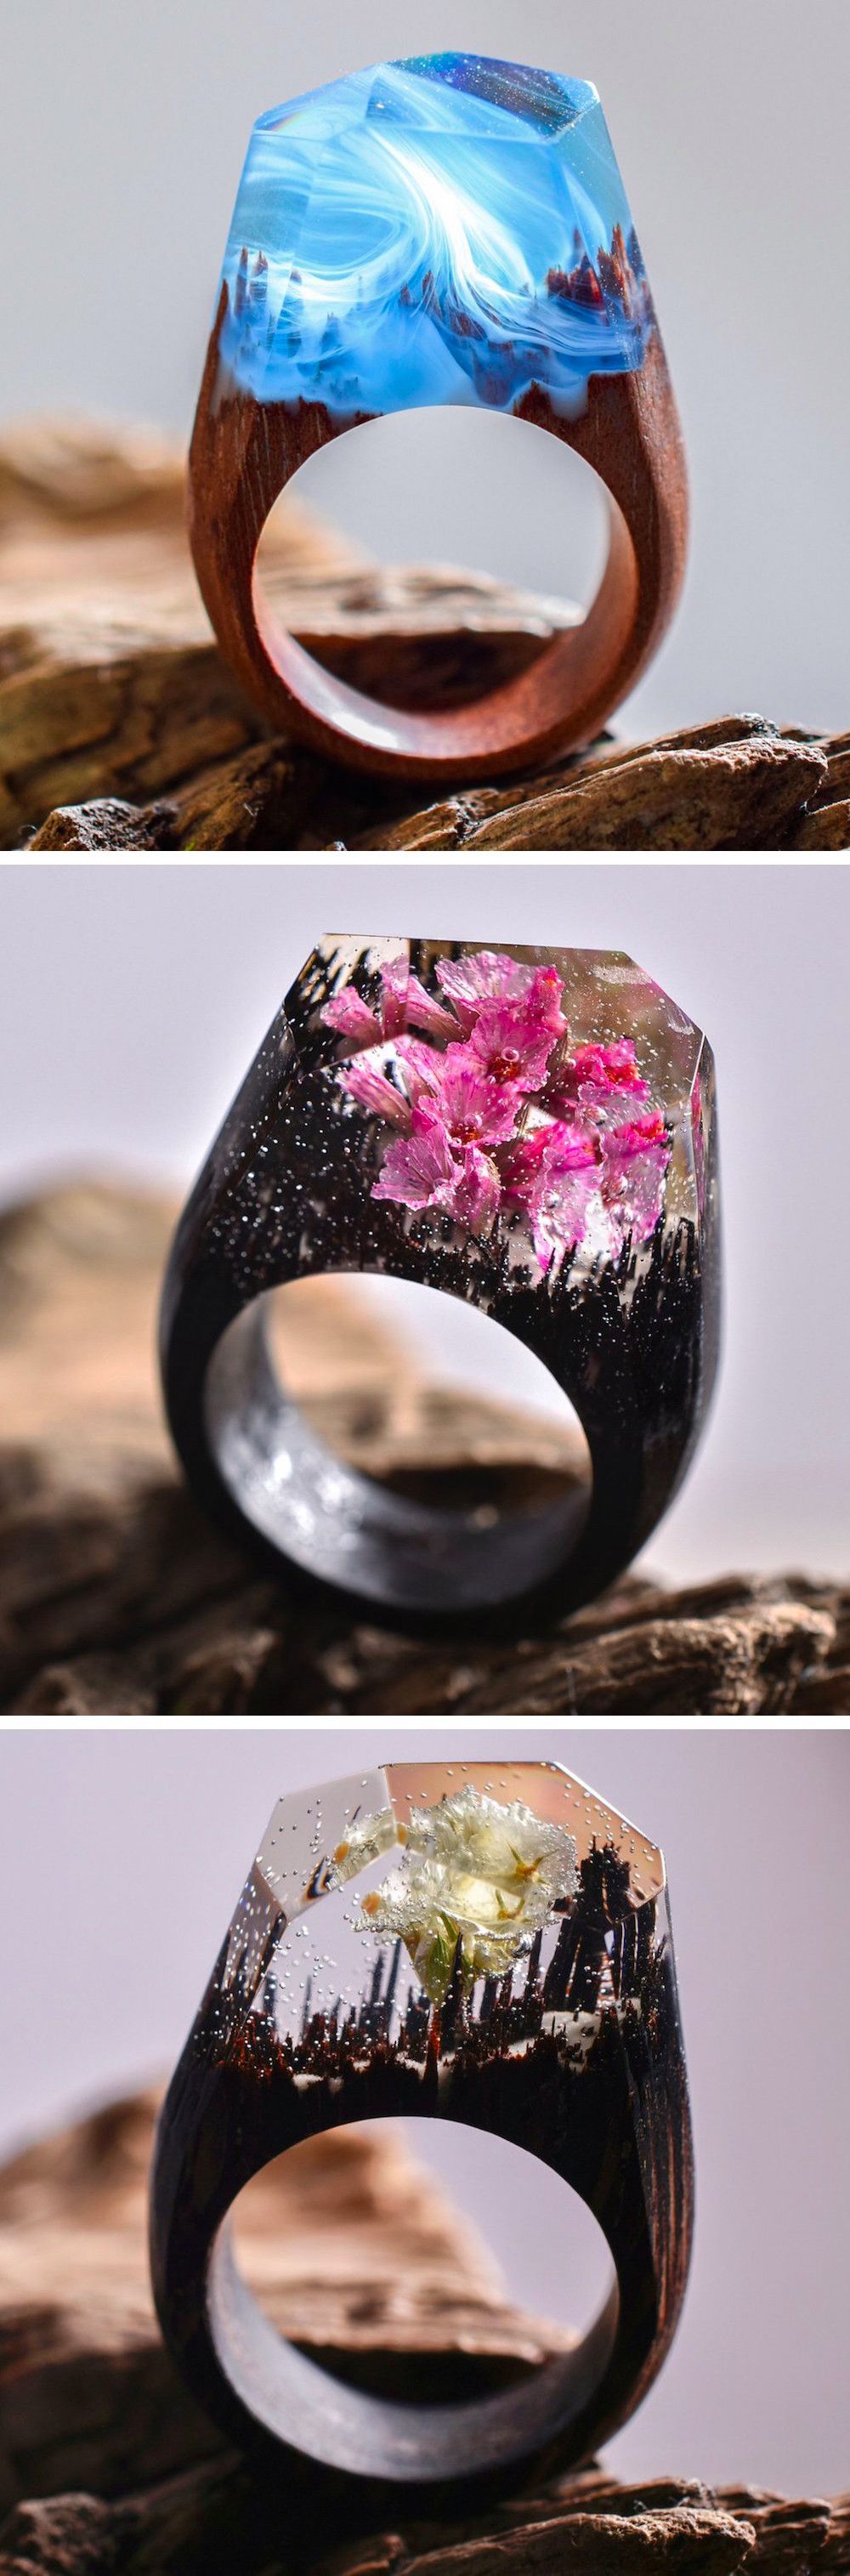 New Ethereal Worlds Encapsulated In Wood and Resin Rings